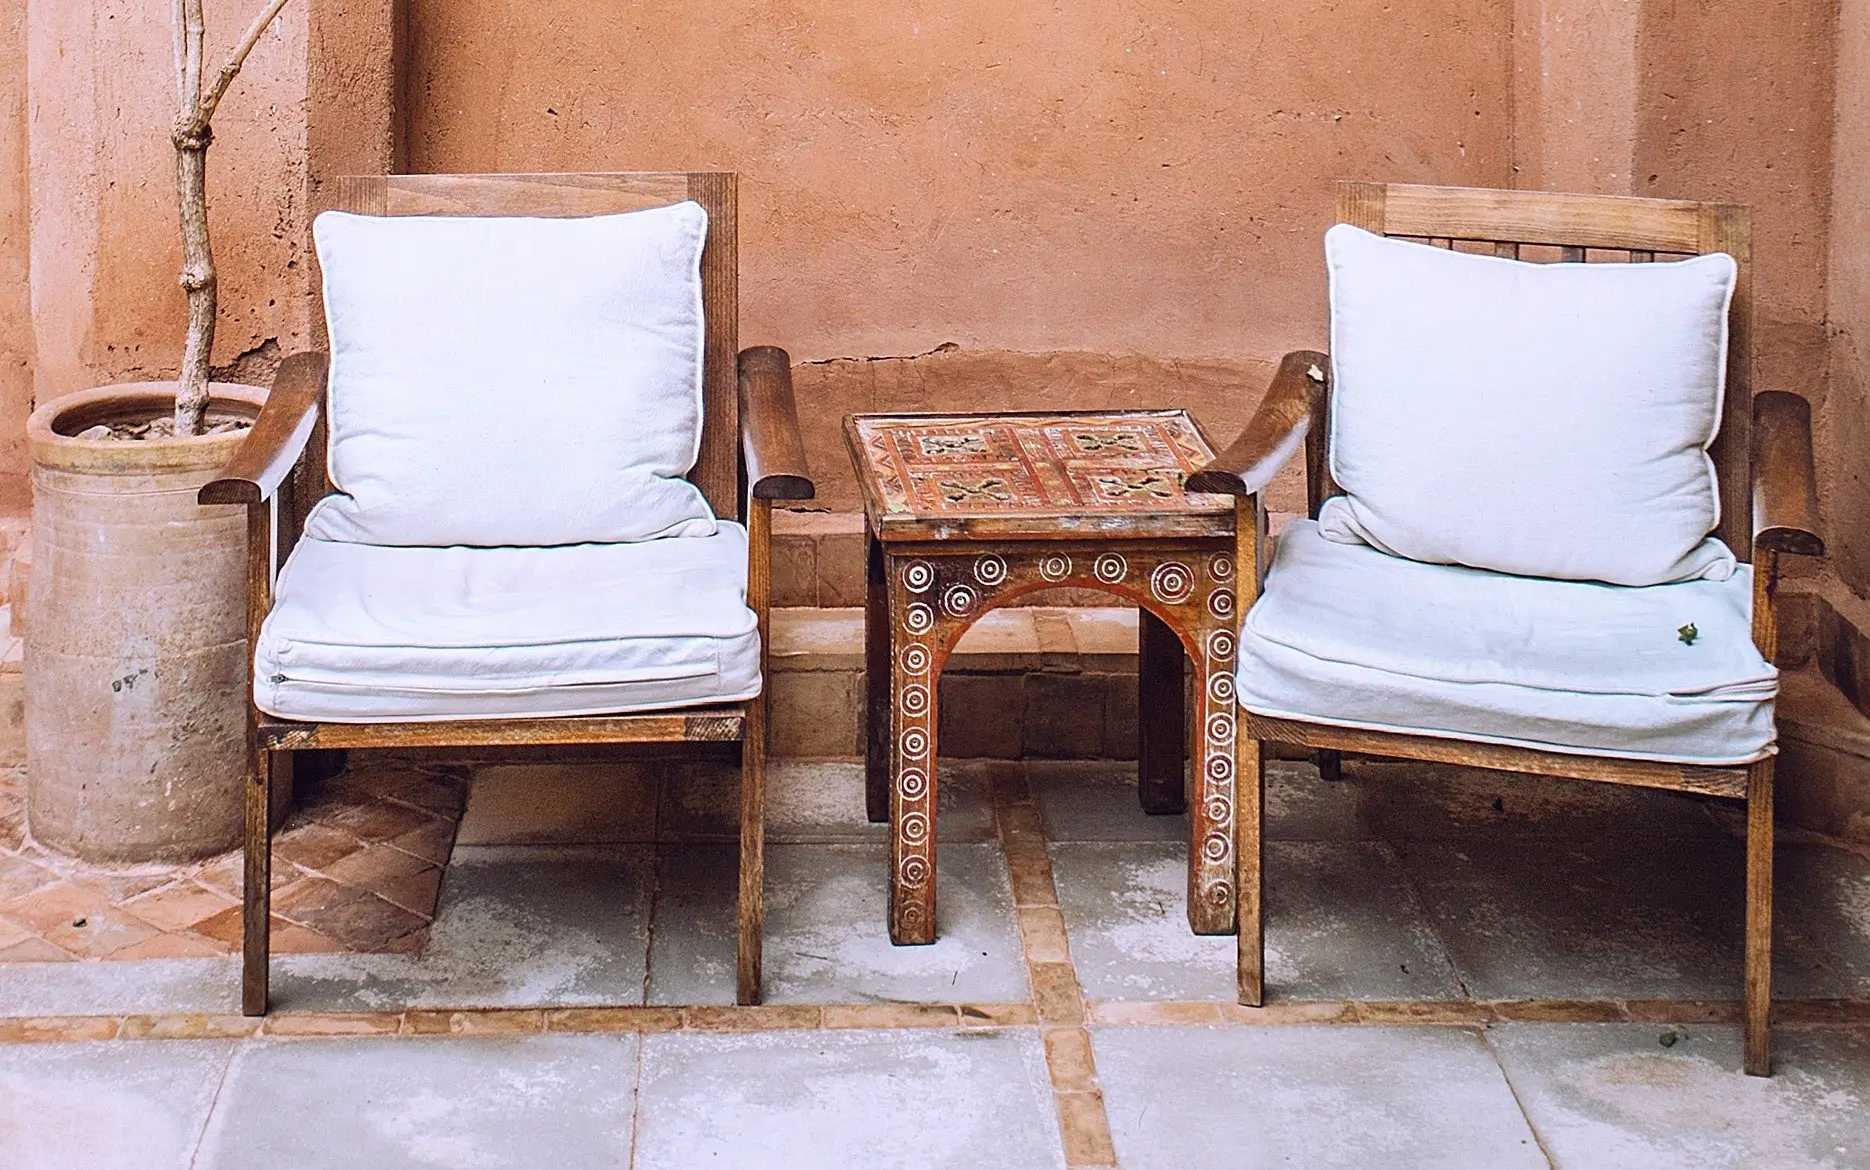 Two wooden chairs and a table in front of a wall.